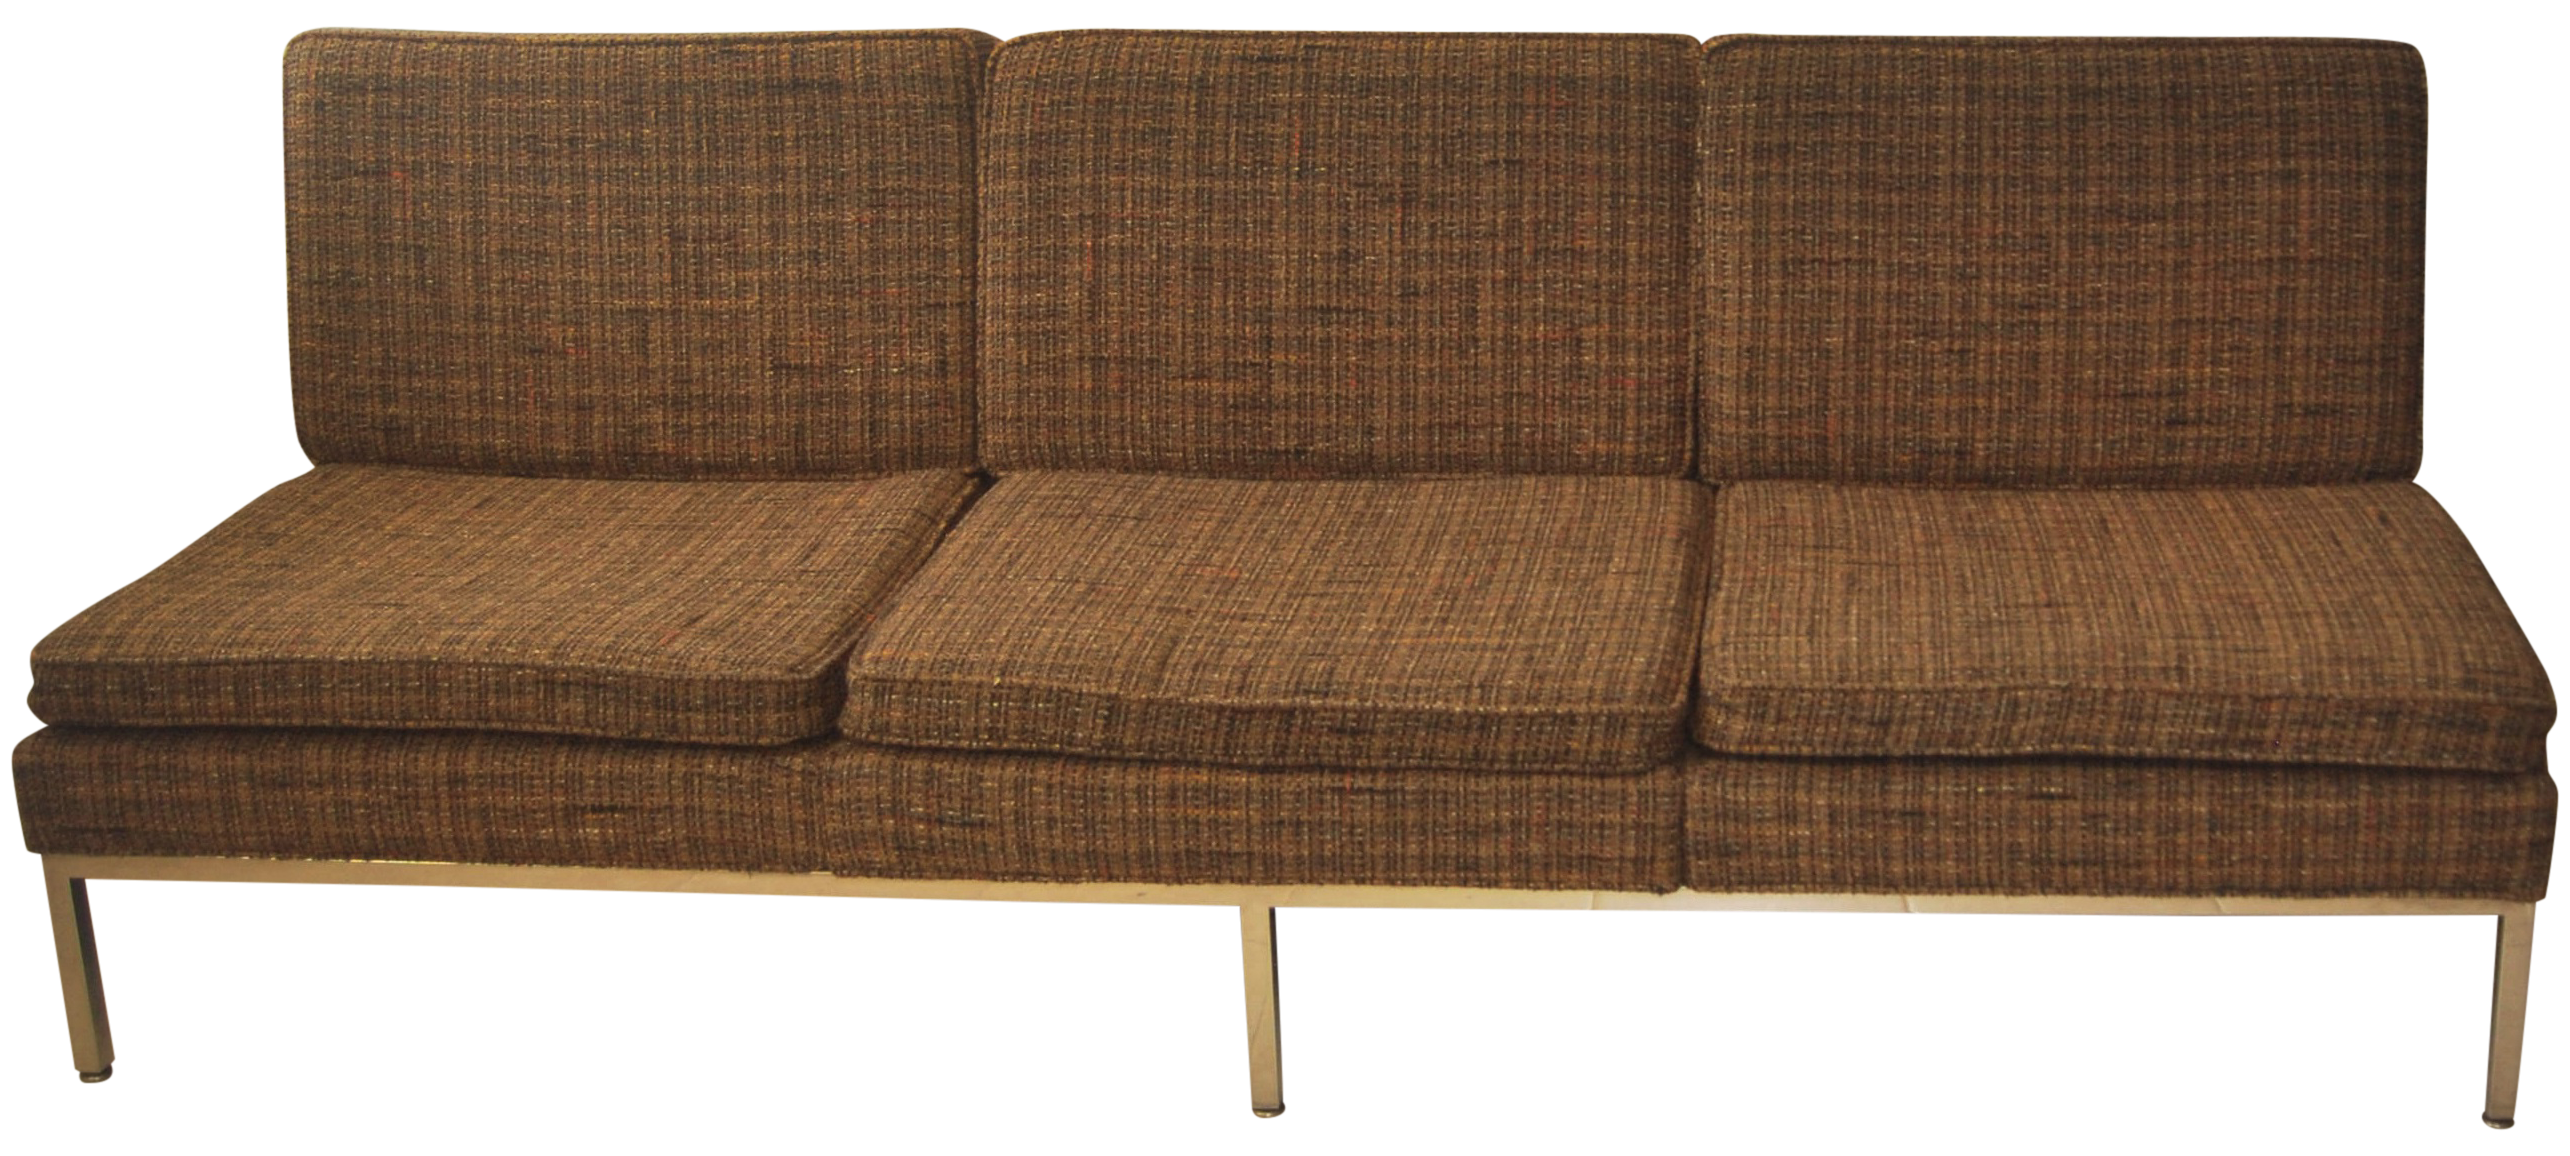 Mid Century 3 Seat Couches In Recent Mid Century 3 Seat Sofa On Chrome Frame (View 13 of 15)